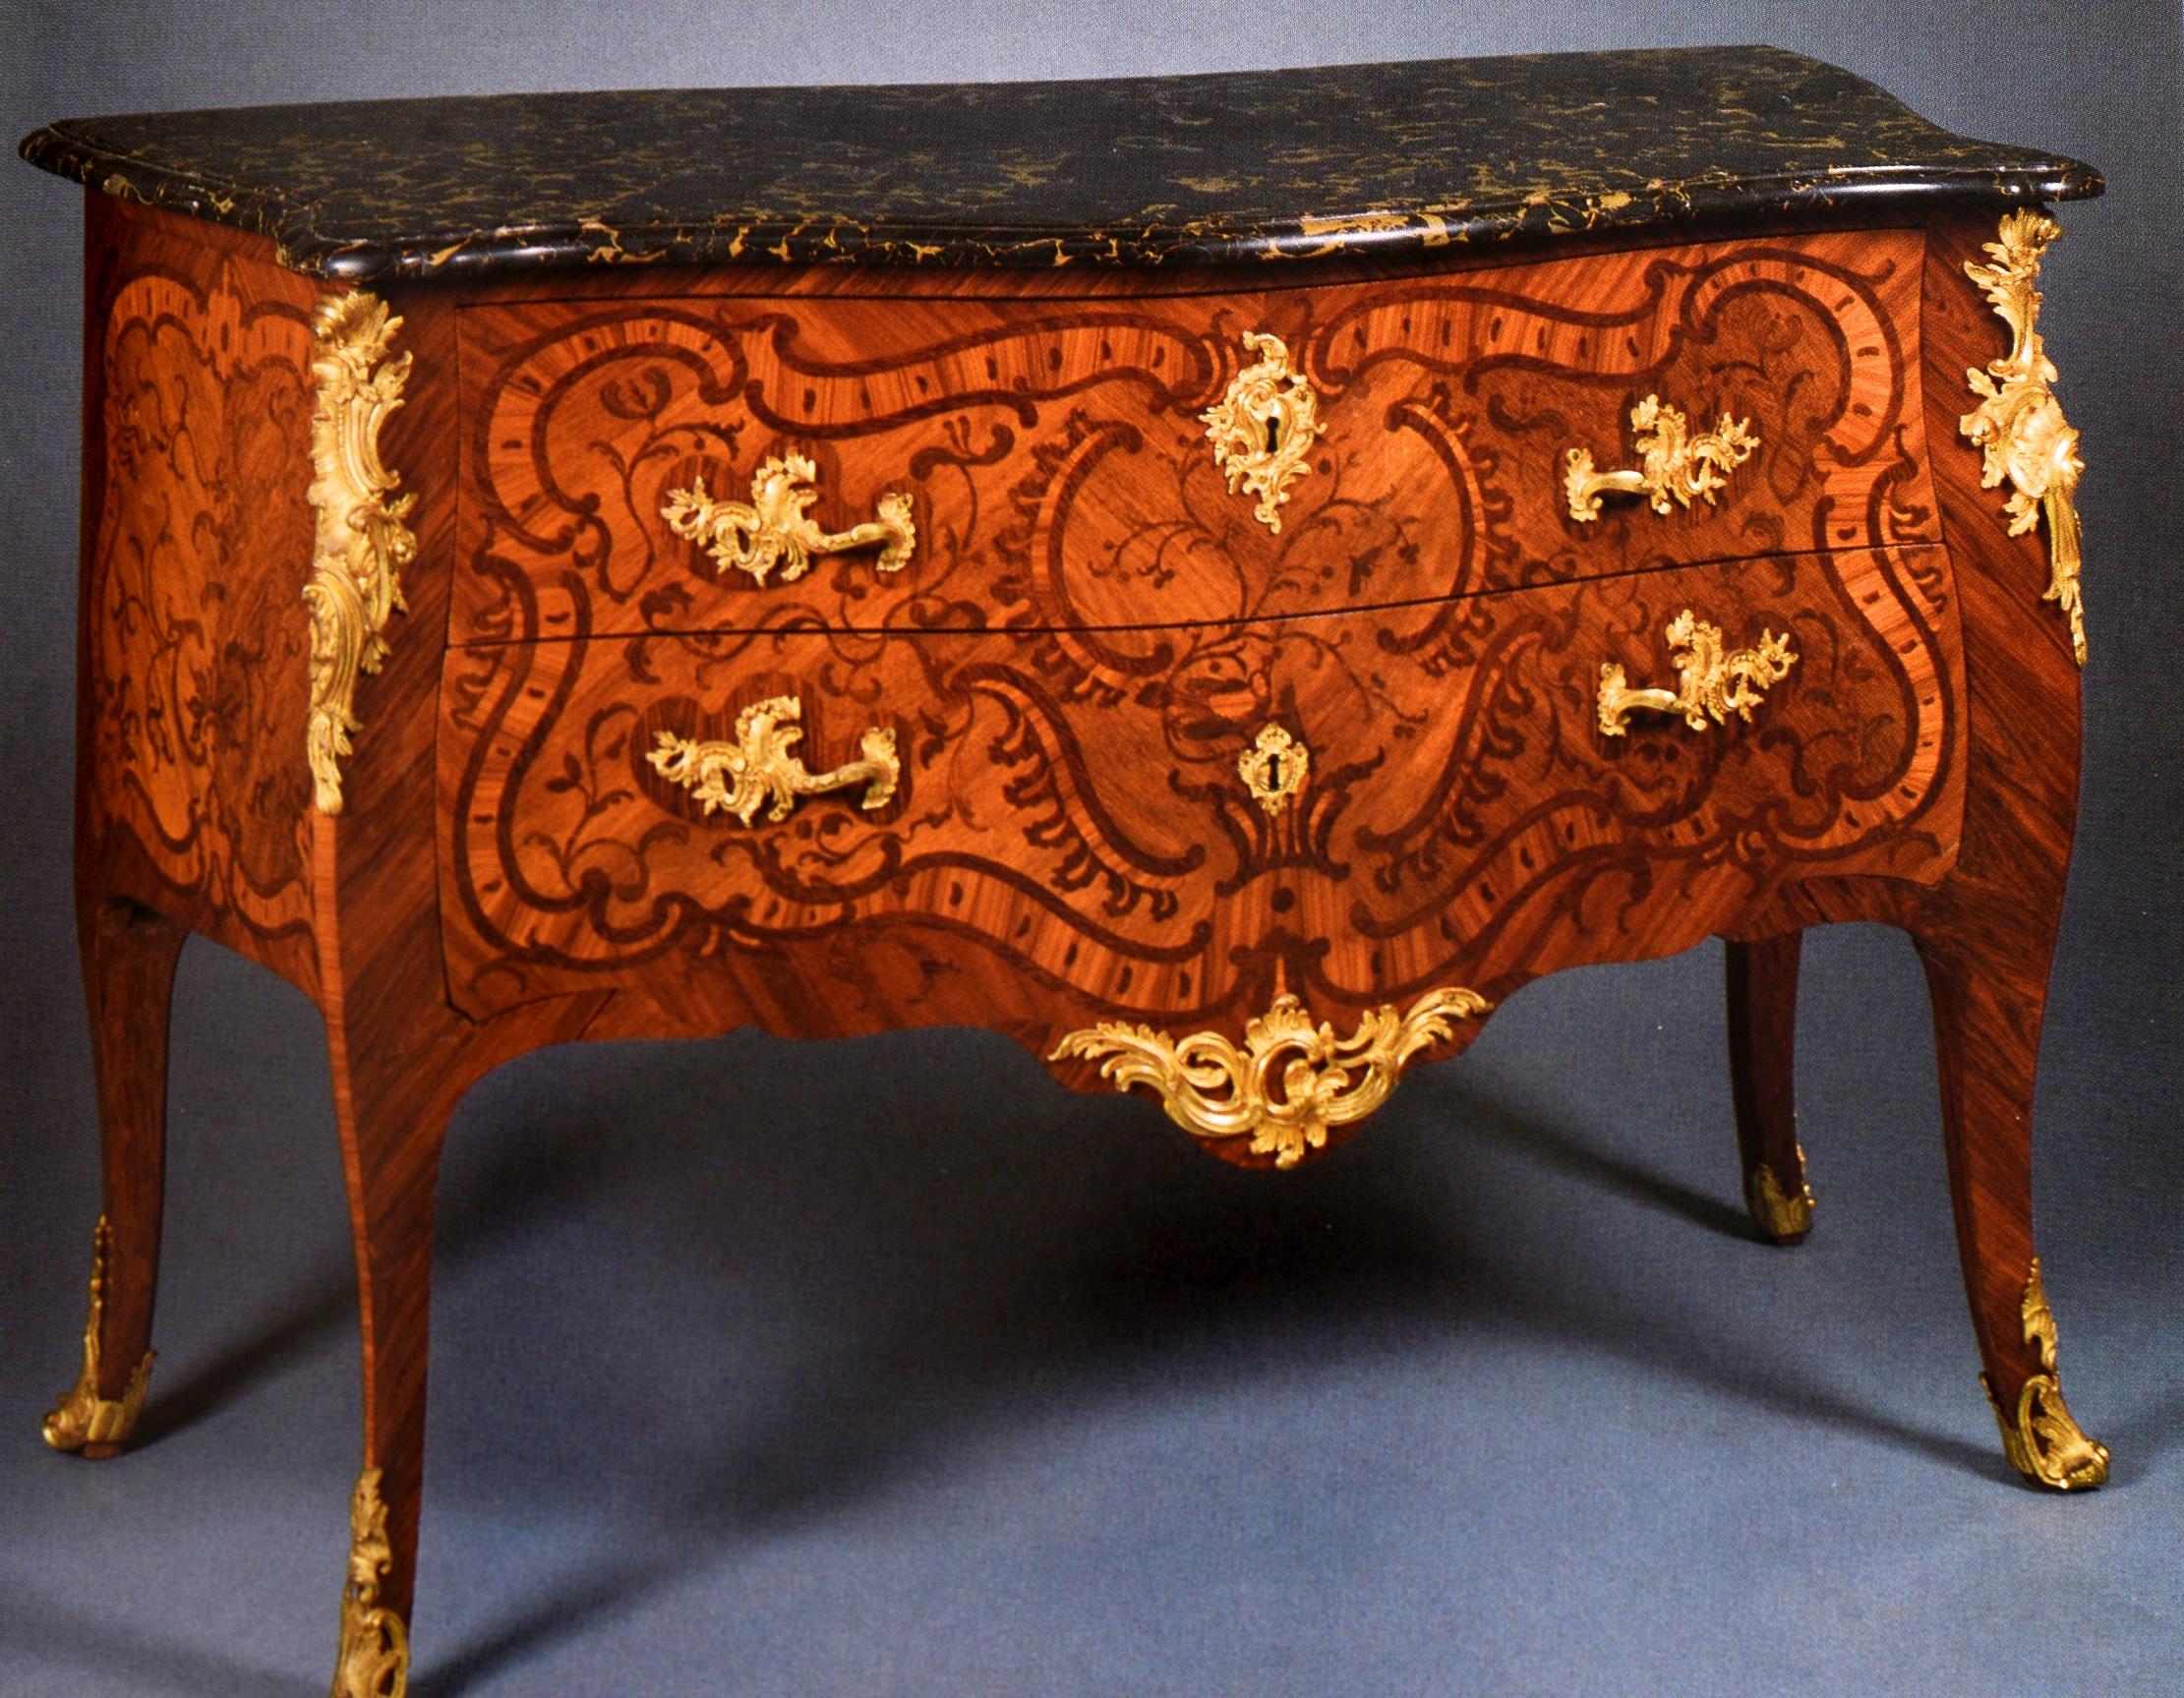 Sotheby's, Highly Important French Furniture from a Private Collection, 1993 For Sale 3